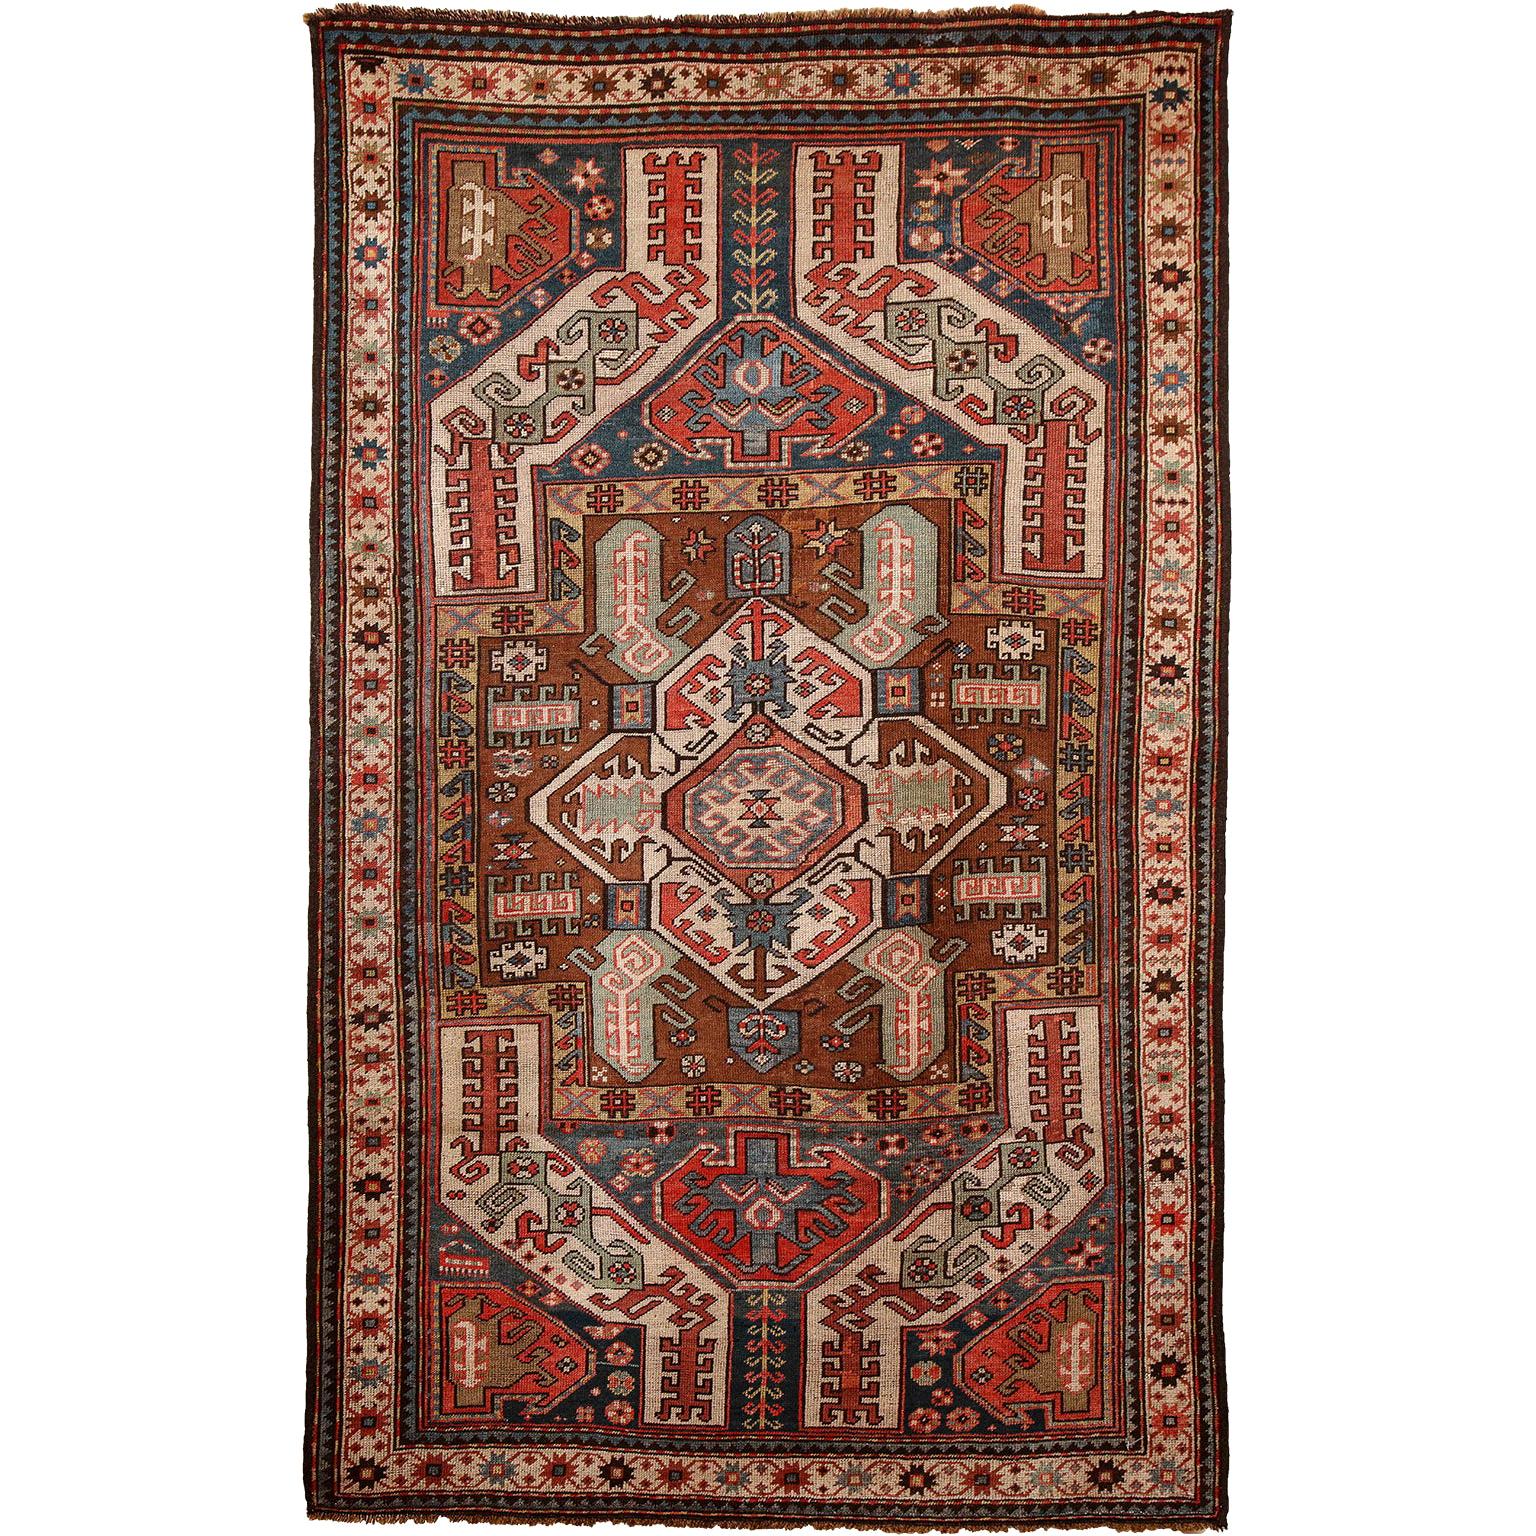 Antique 1880s Caucasian Rug, Wool, Blue, Green, Red, 4' x 6'